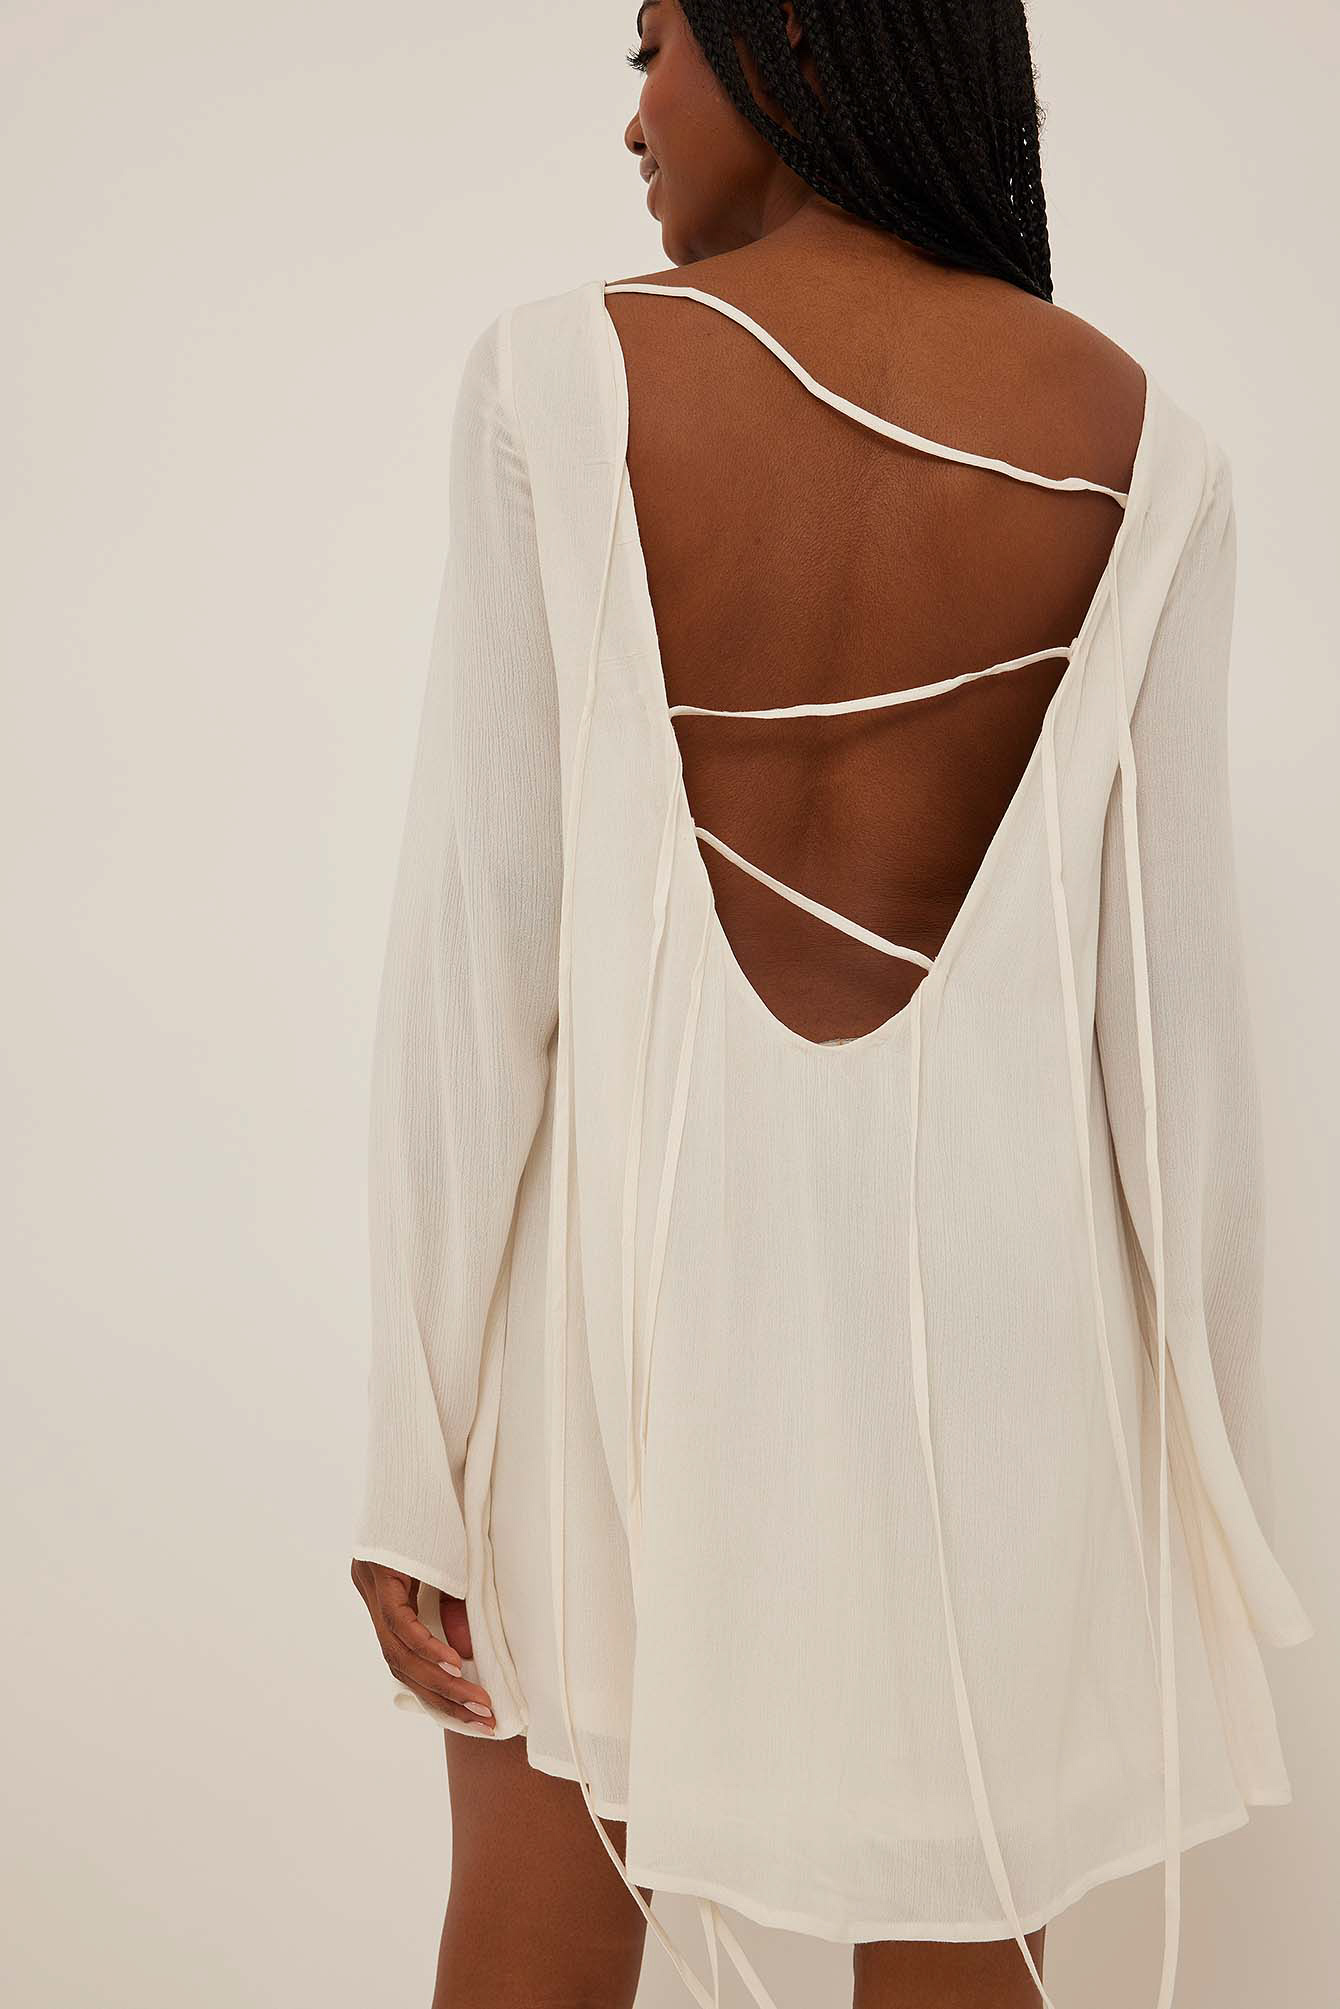 Angelica Blick X Na-kd Open Back Straps Dress - Offwhite